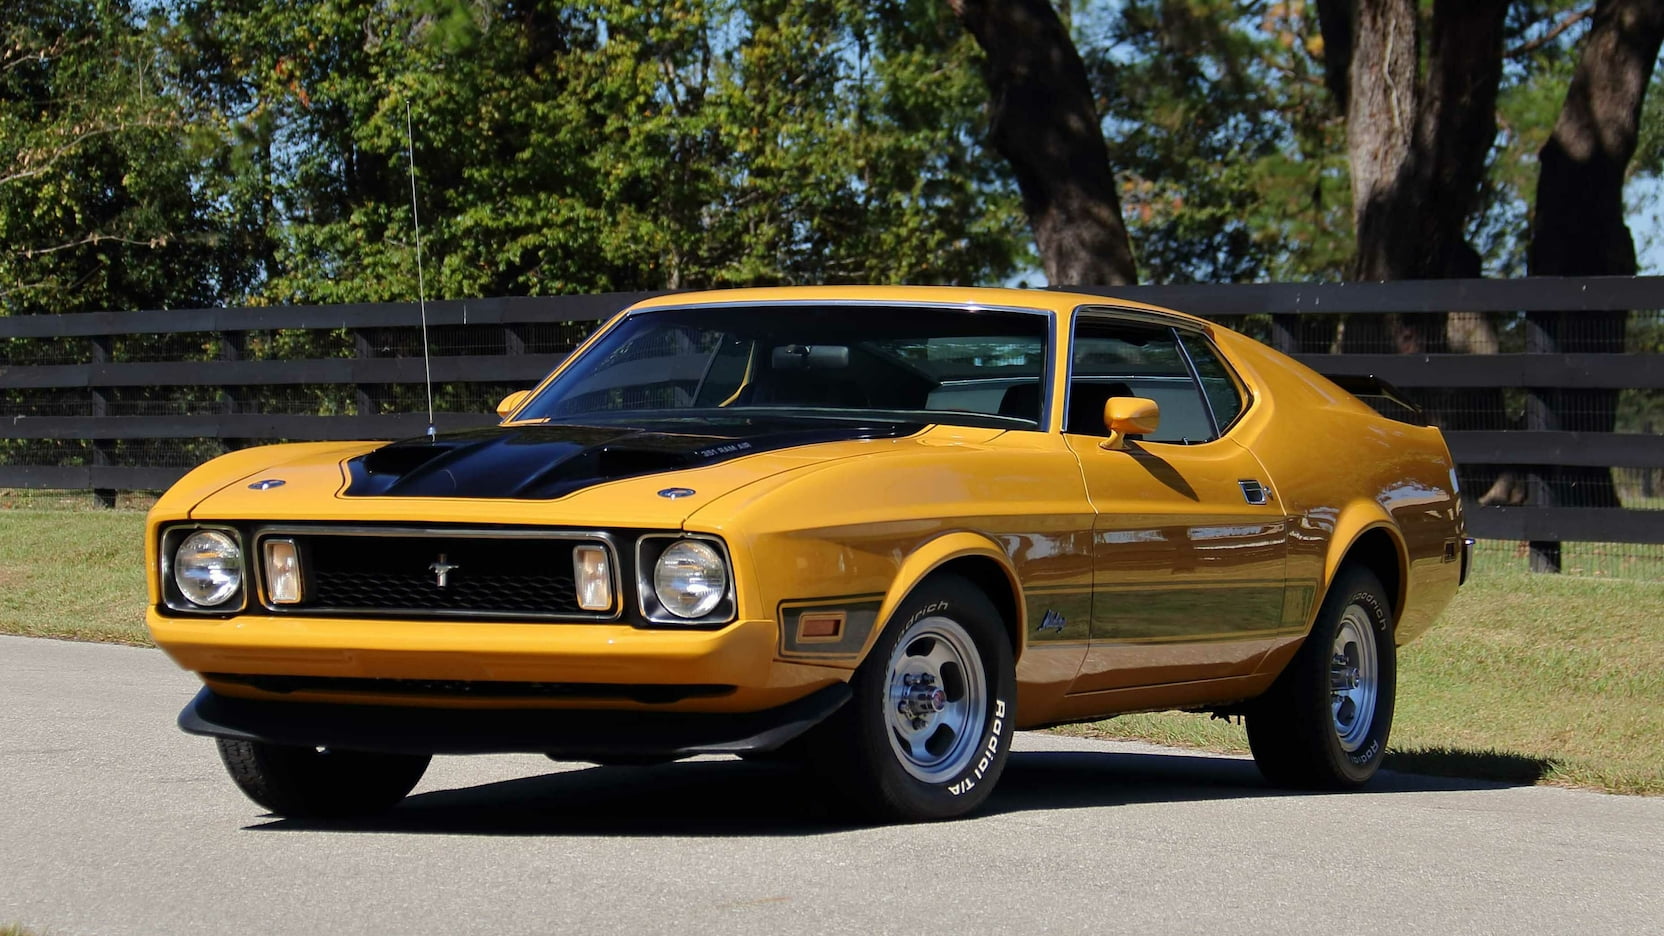 FOR SALE: Highly Original 1973 Ford Mustang Mach 1 Fastback - Mustang Specs